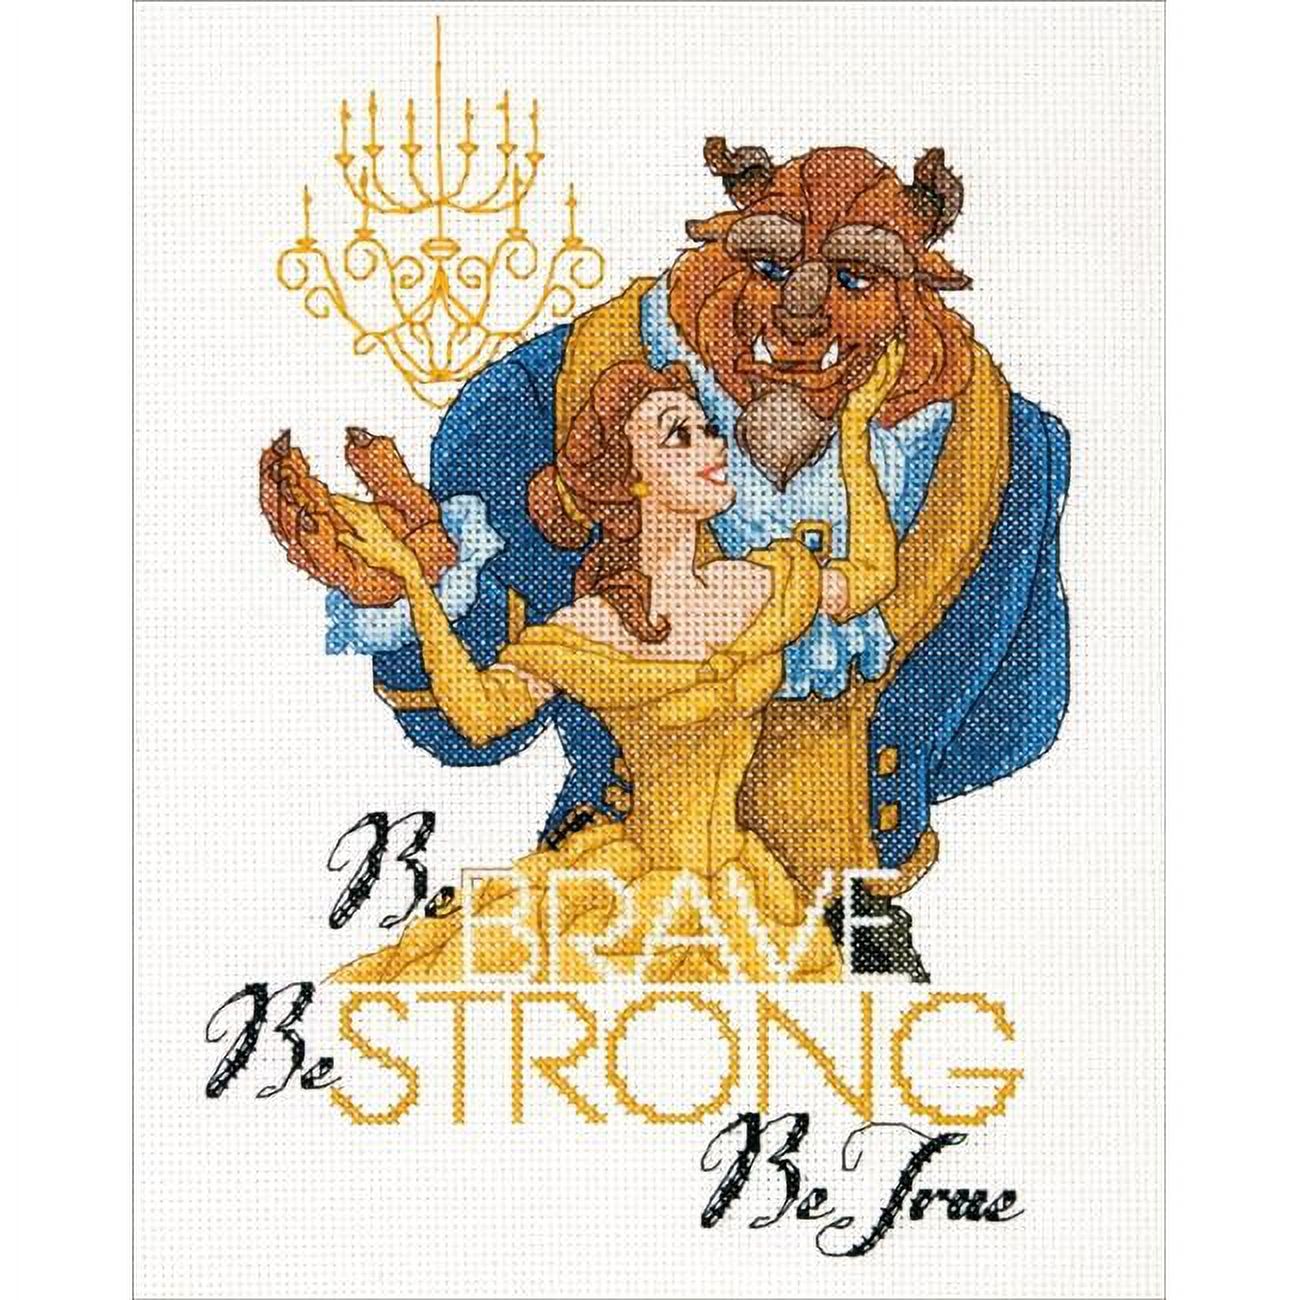 Be Brave (14 Count) Disney Counted Cross Stitch Kit 8x10 - Dimensions